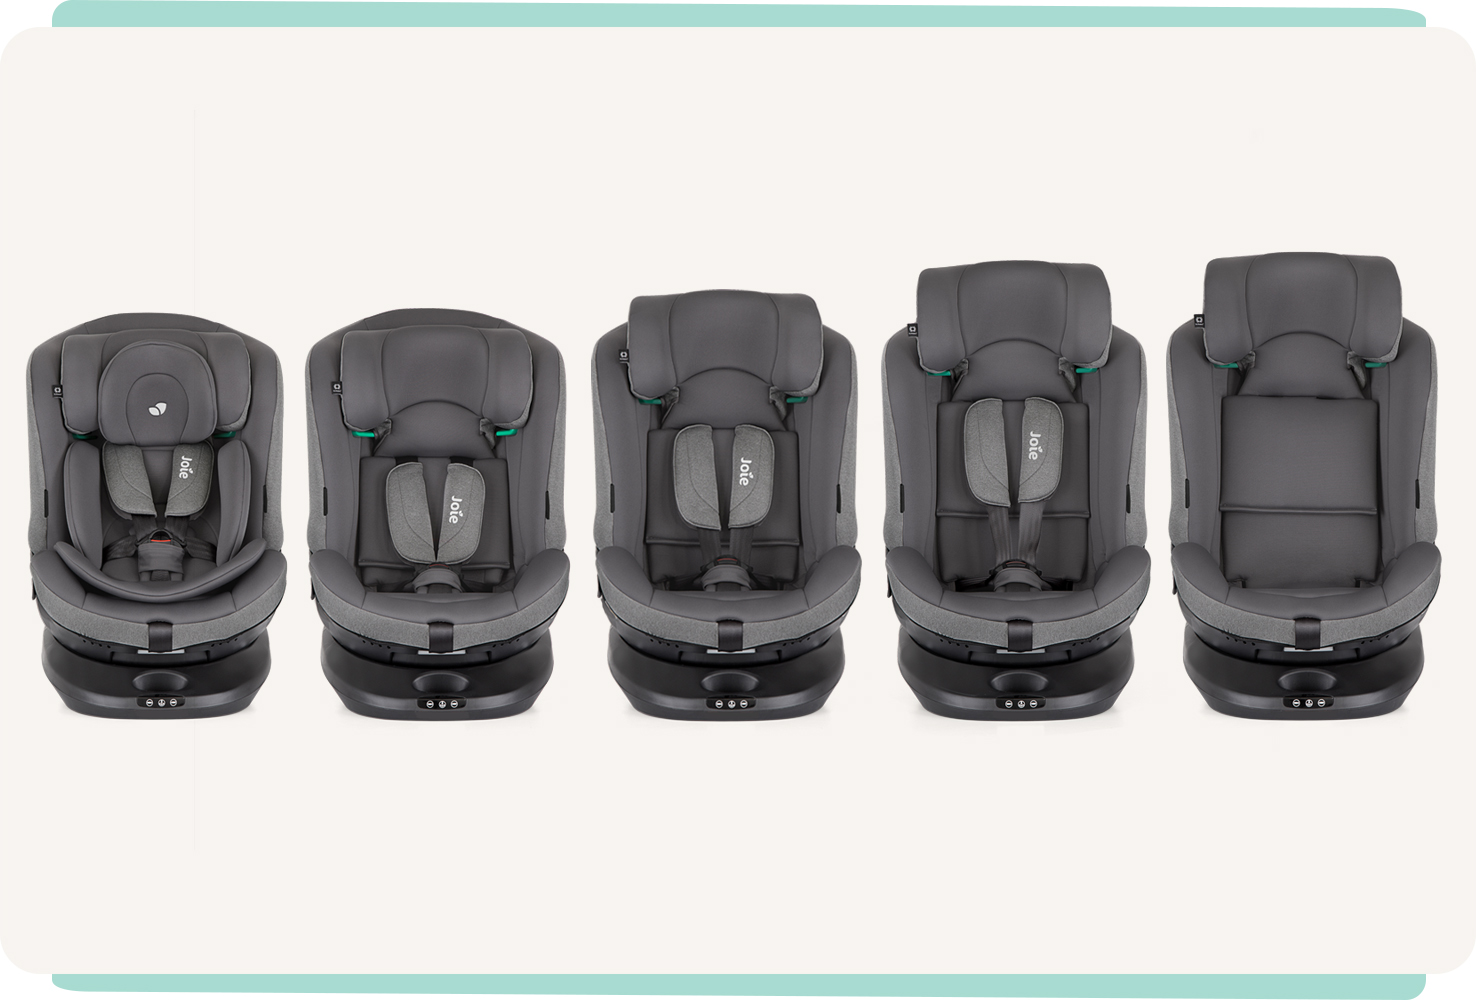 image of the i-spin multiway in each stage of car seat available.